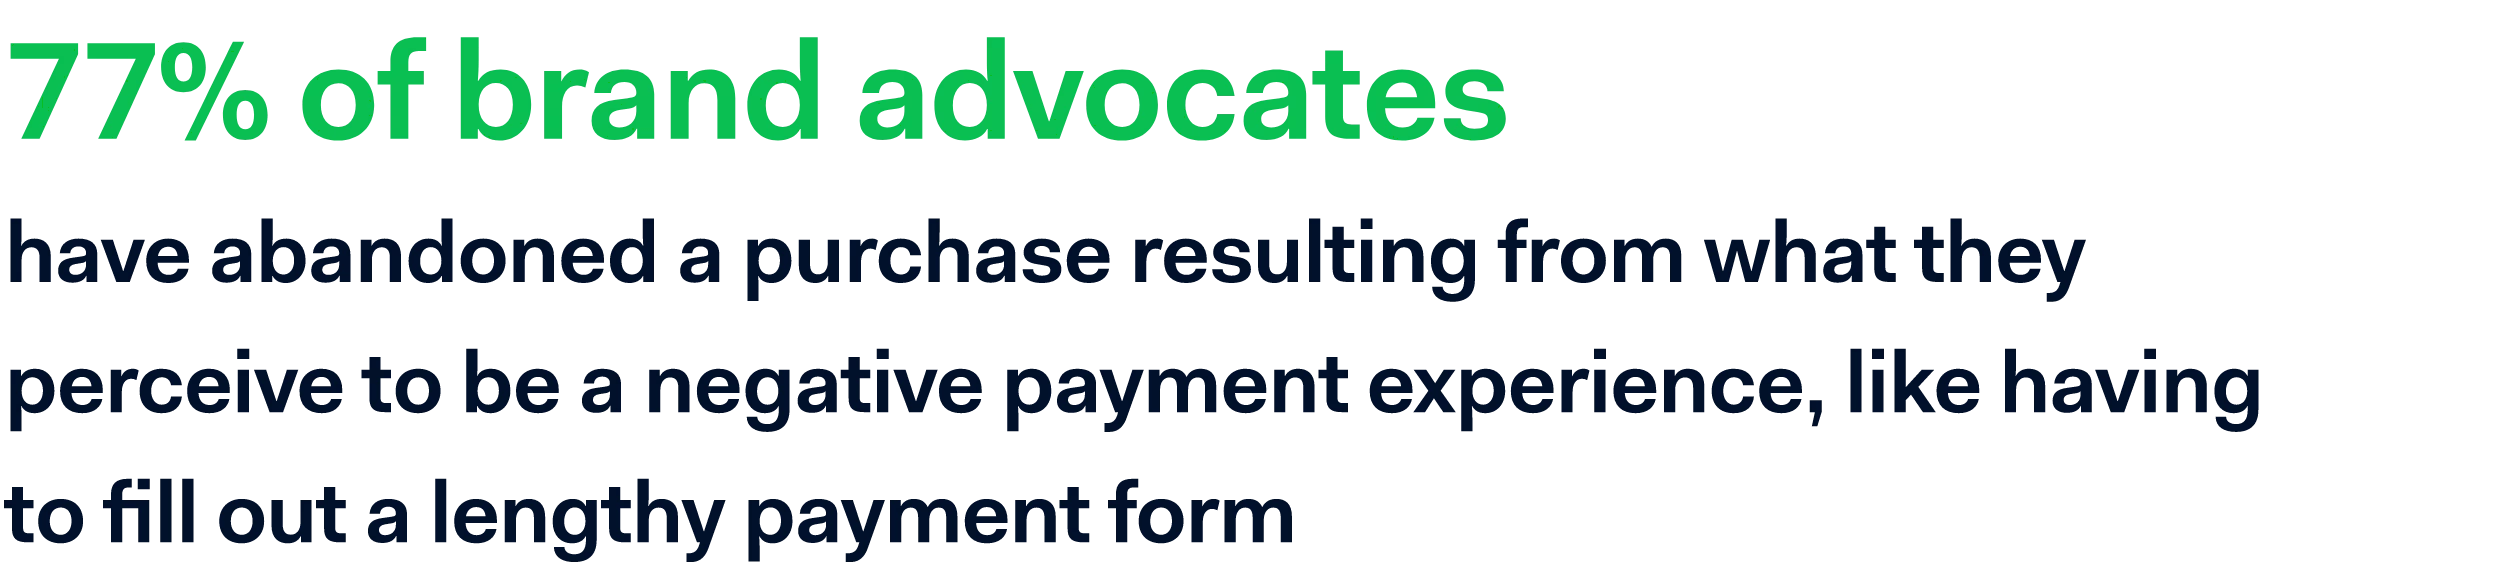 More than three quarters (77%) of brand advocates have abandoned a purchase resulting from what they perceive to be a negative payment experience, like having to fill out a lengthy payment form.